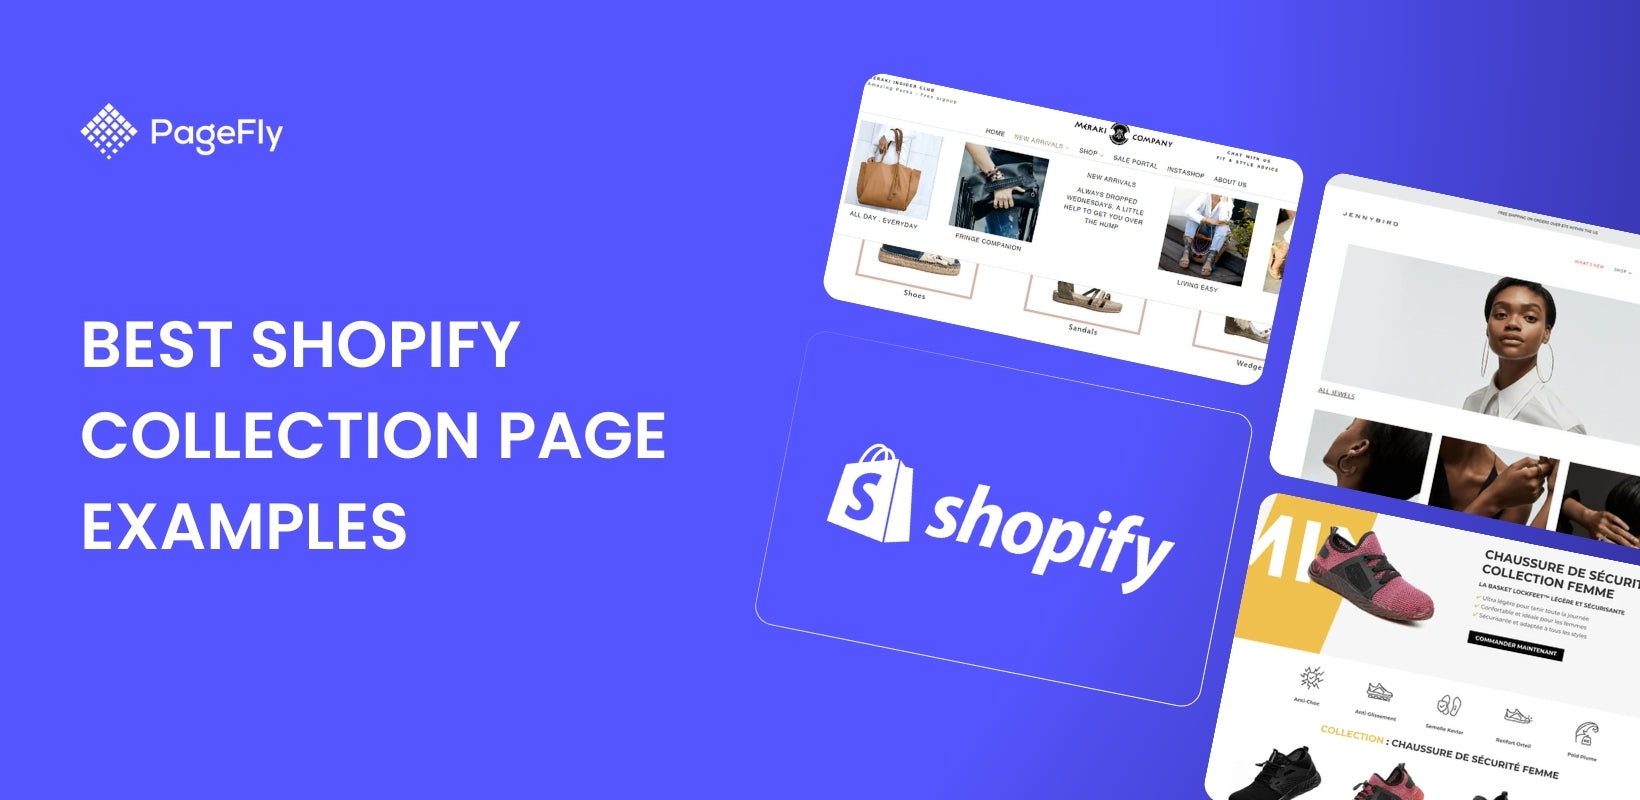 Best Shopify Collection Page Examples